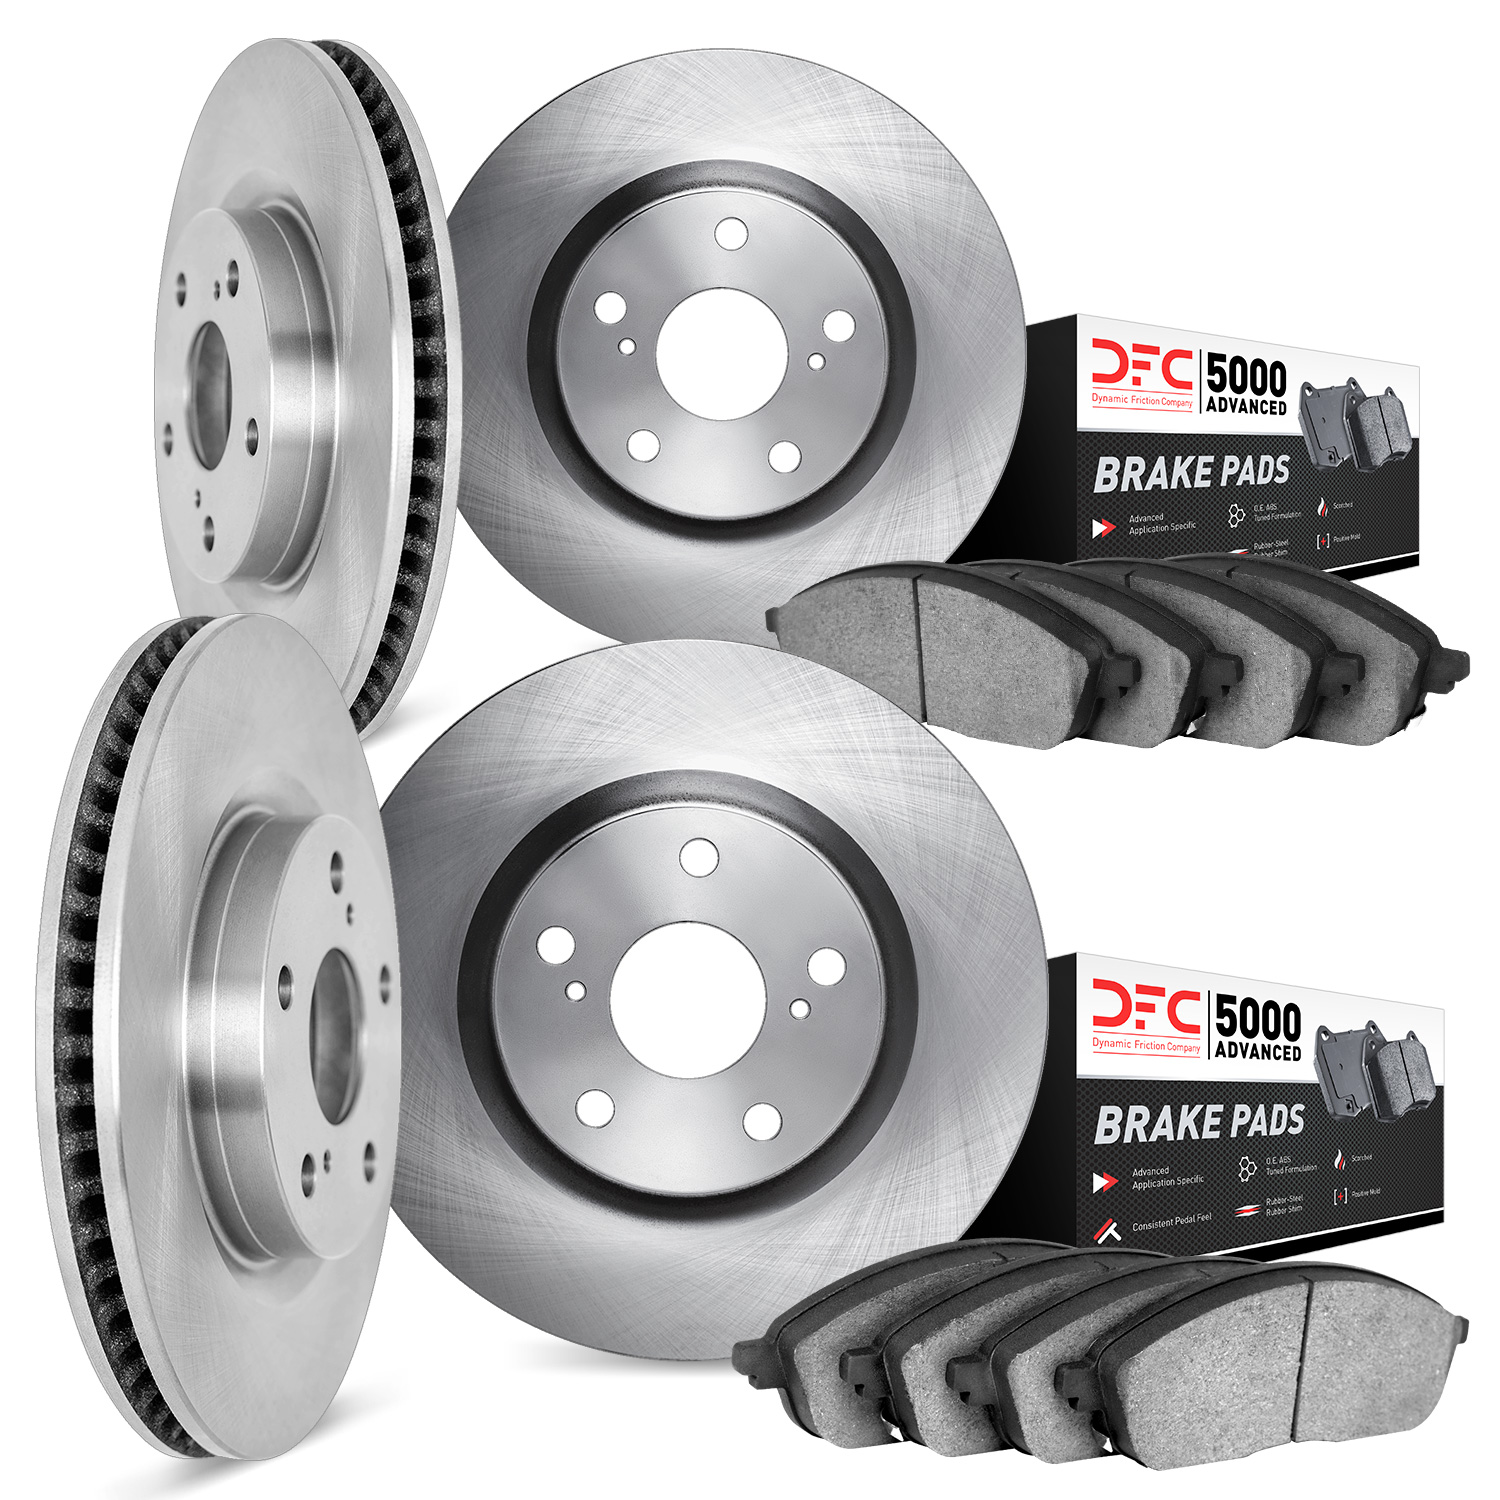 6504-31030 Brake Rotors w/5000 Advanced Brake Pads Kit, 2007-2015 BMW, Position: Front and Rear